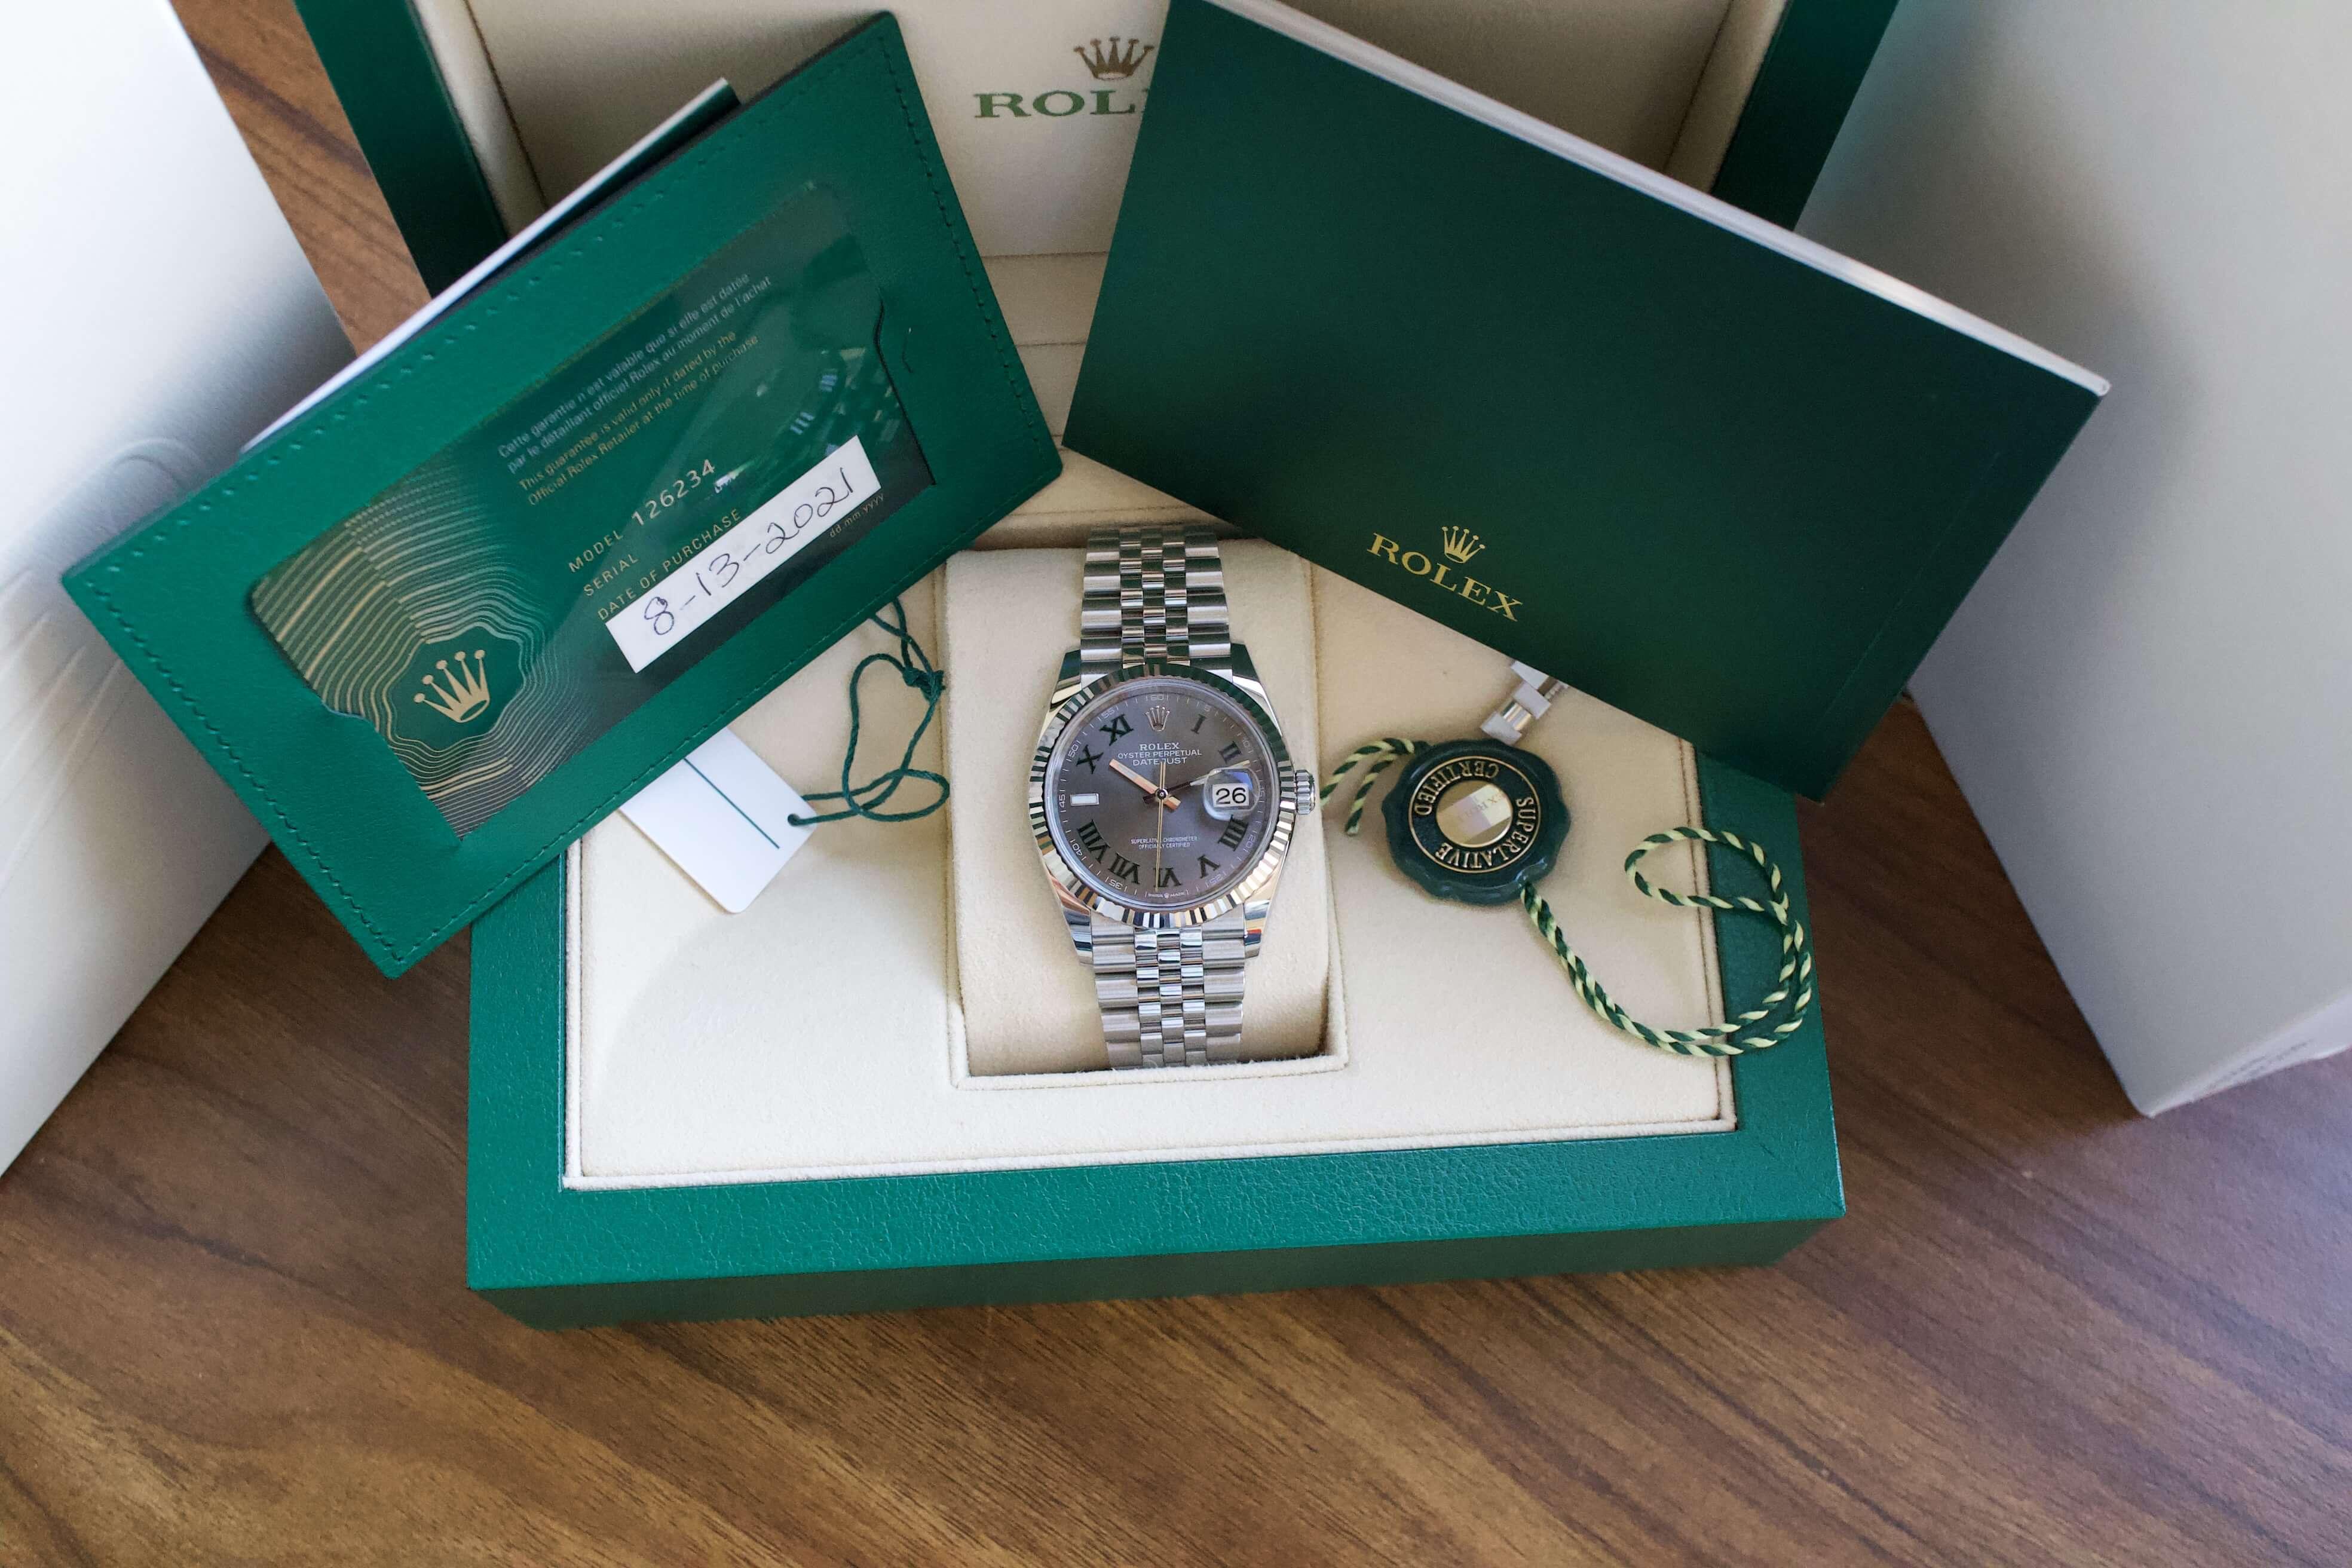 The Birks Rolex Watches Launch Event at the CORE Calgary